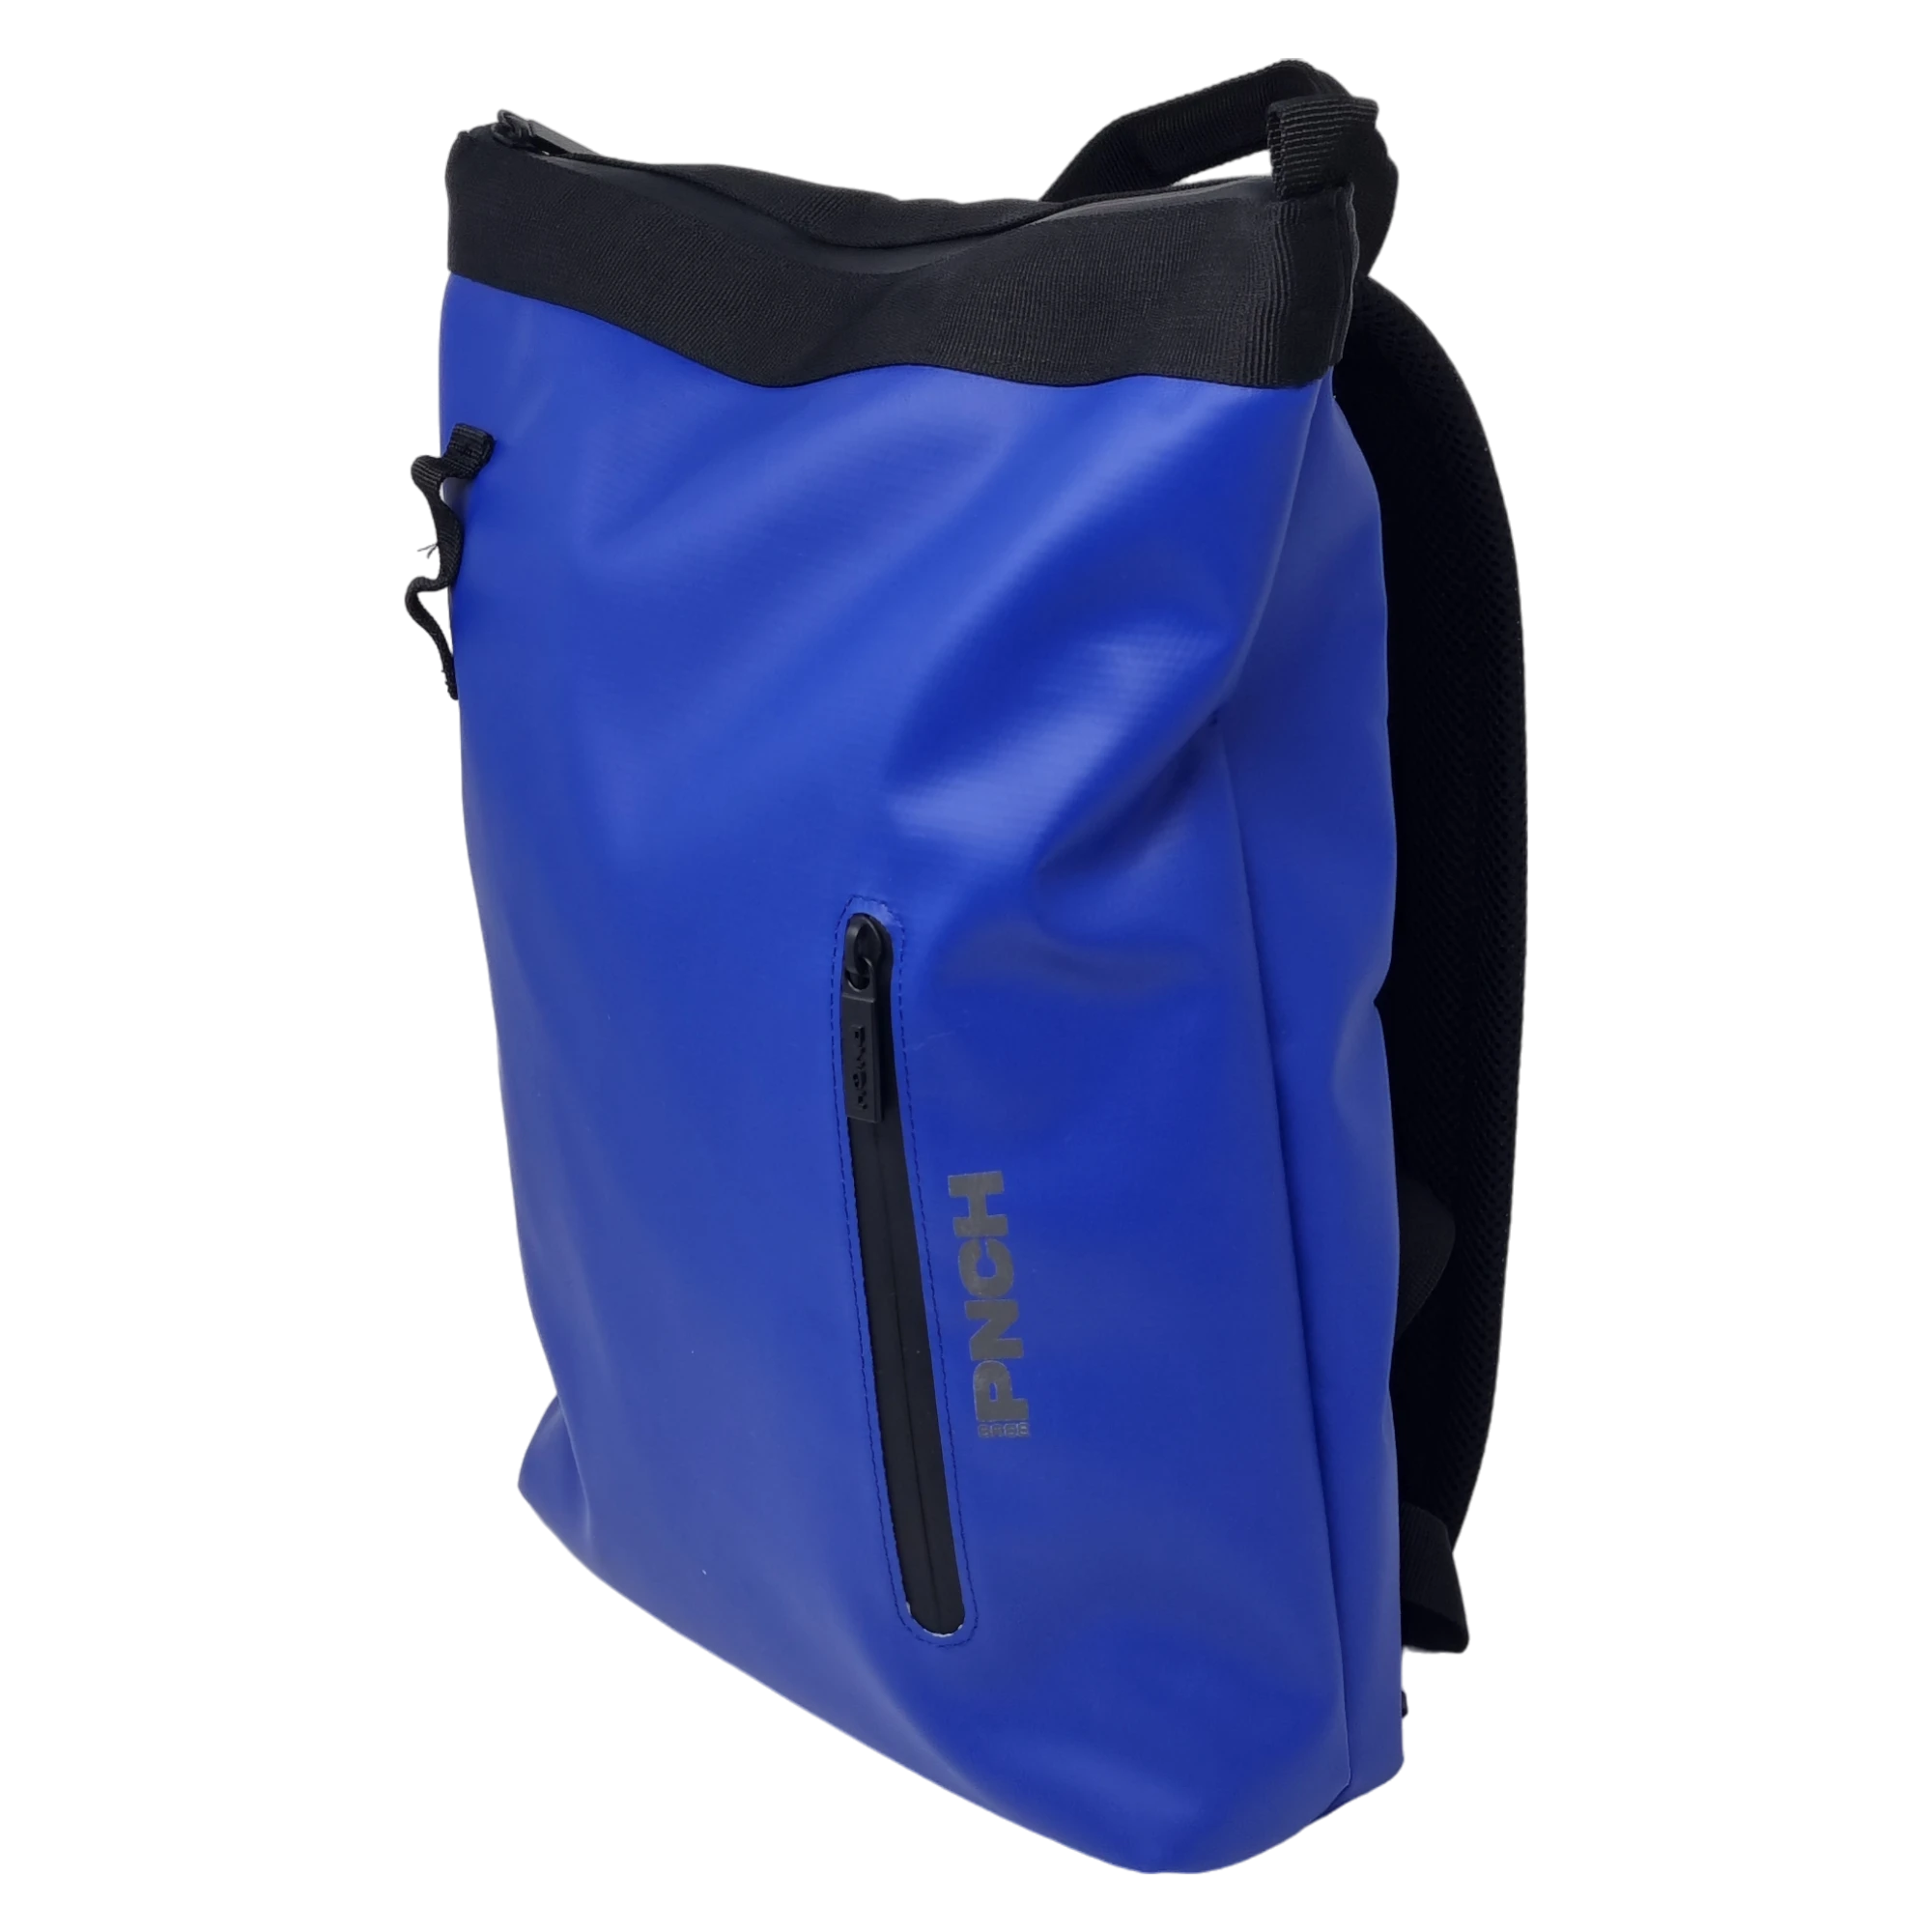 PNCH 797 slim backpack - space blue